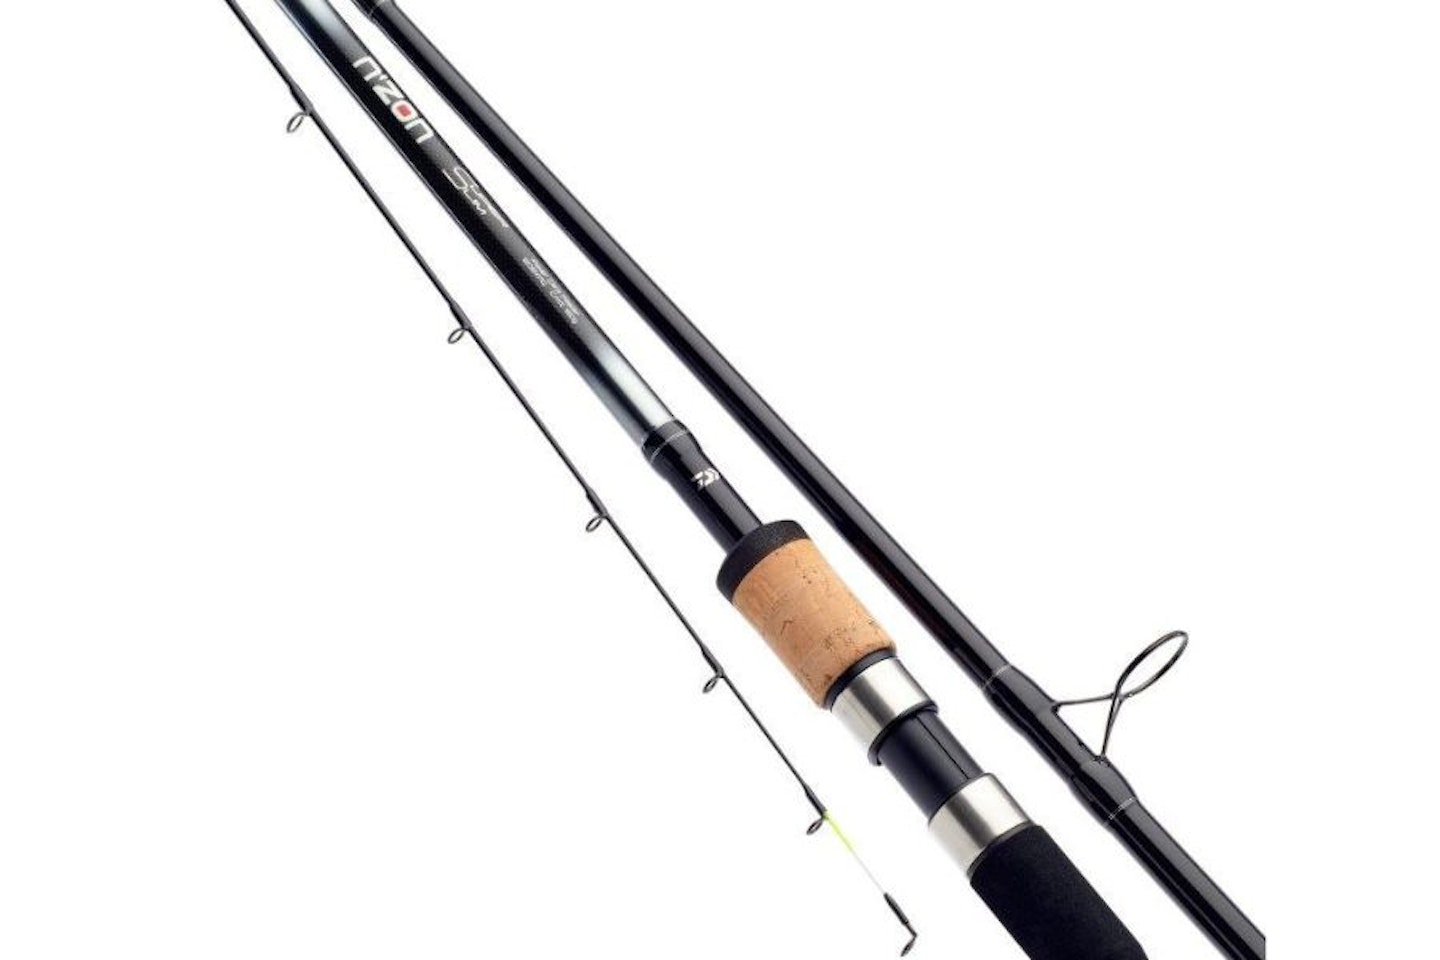 Preston Innovations Ascension feeder rods review